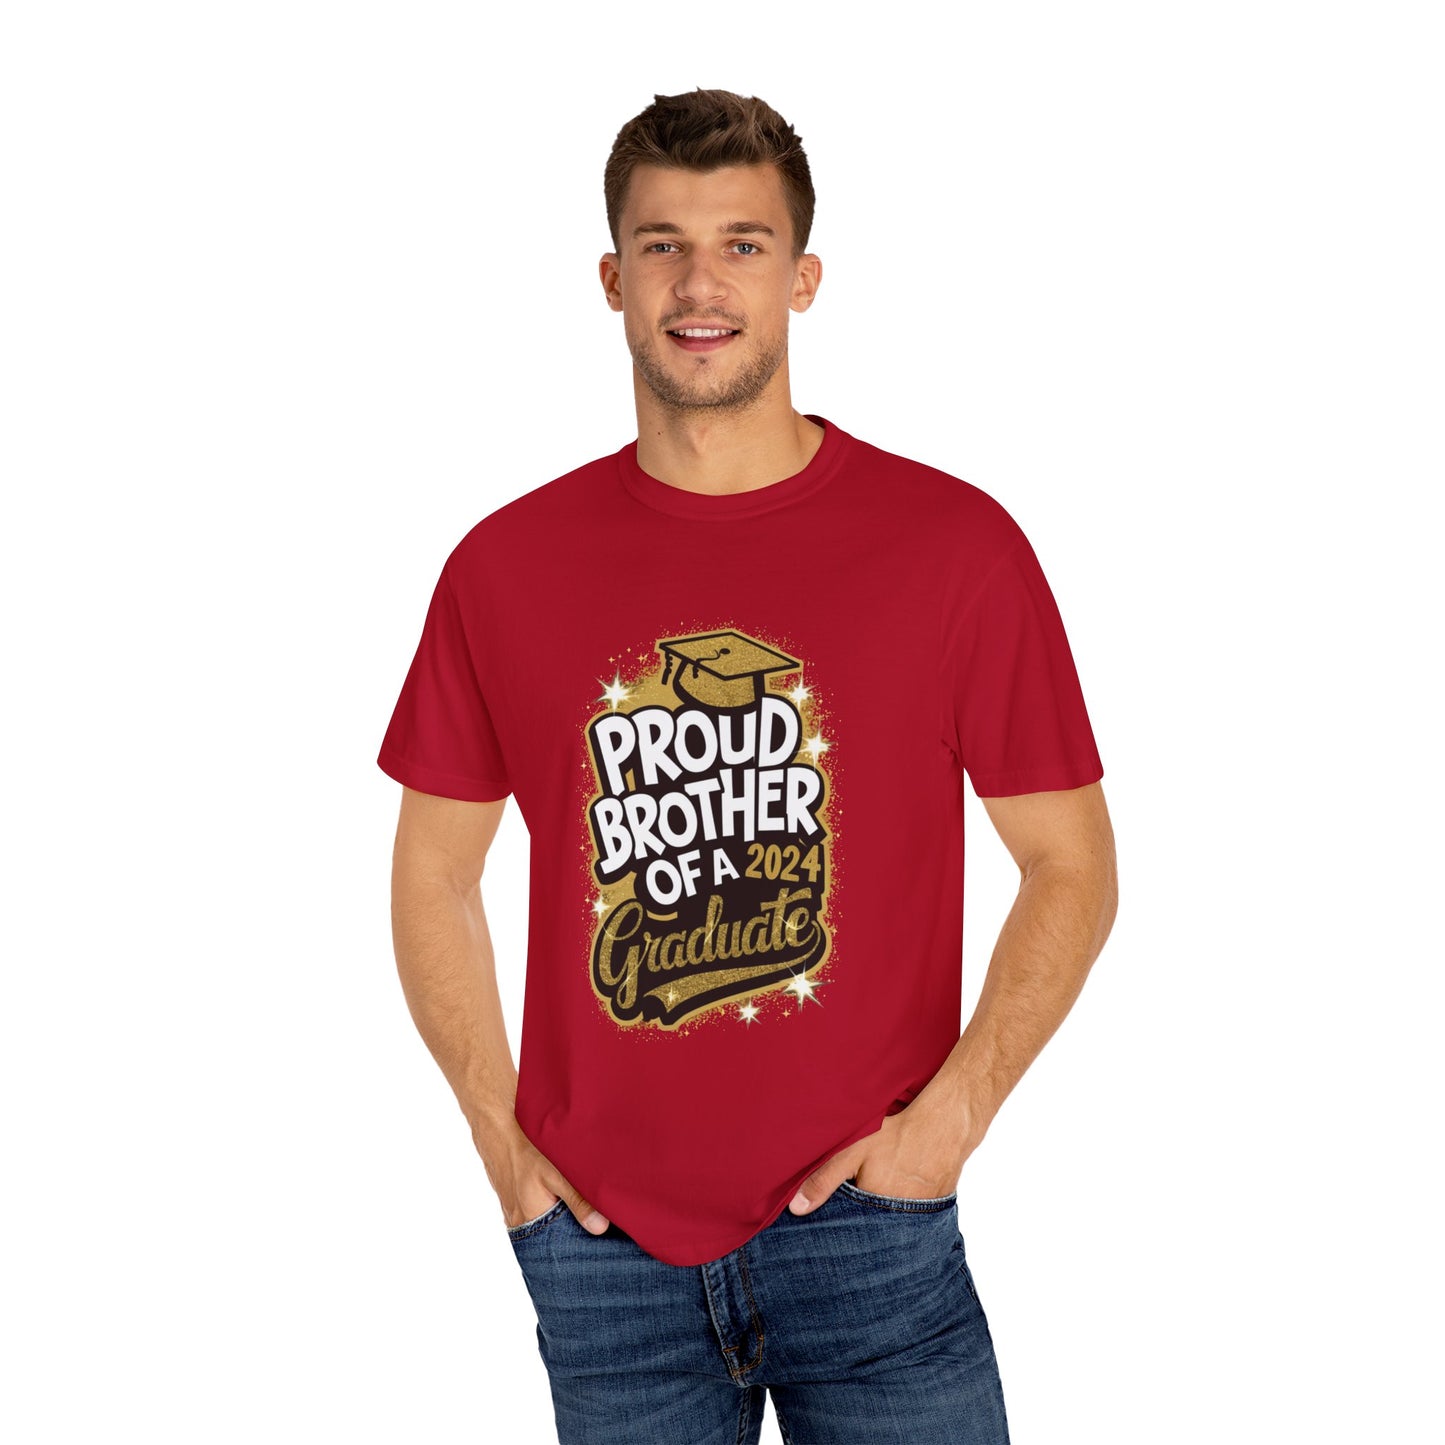 Proud Brother of a 2024 Graduate Unisex Garment-dyed T-shirt Cotton Funny Humorous Graphic Soft Premium Unisex Men Women Red T-shirt Birthday Gift-21